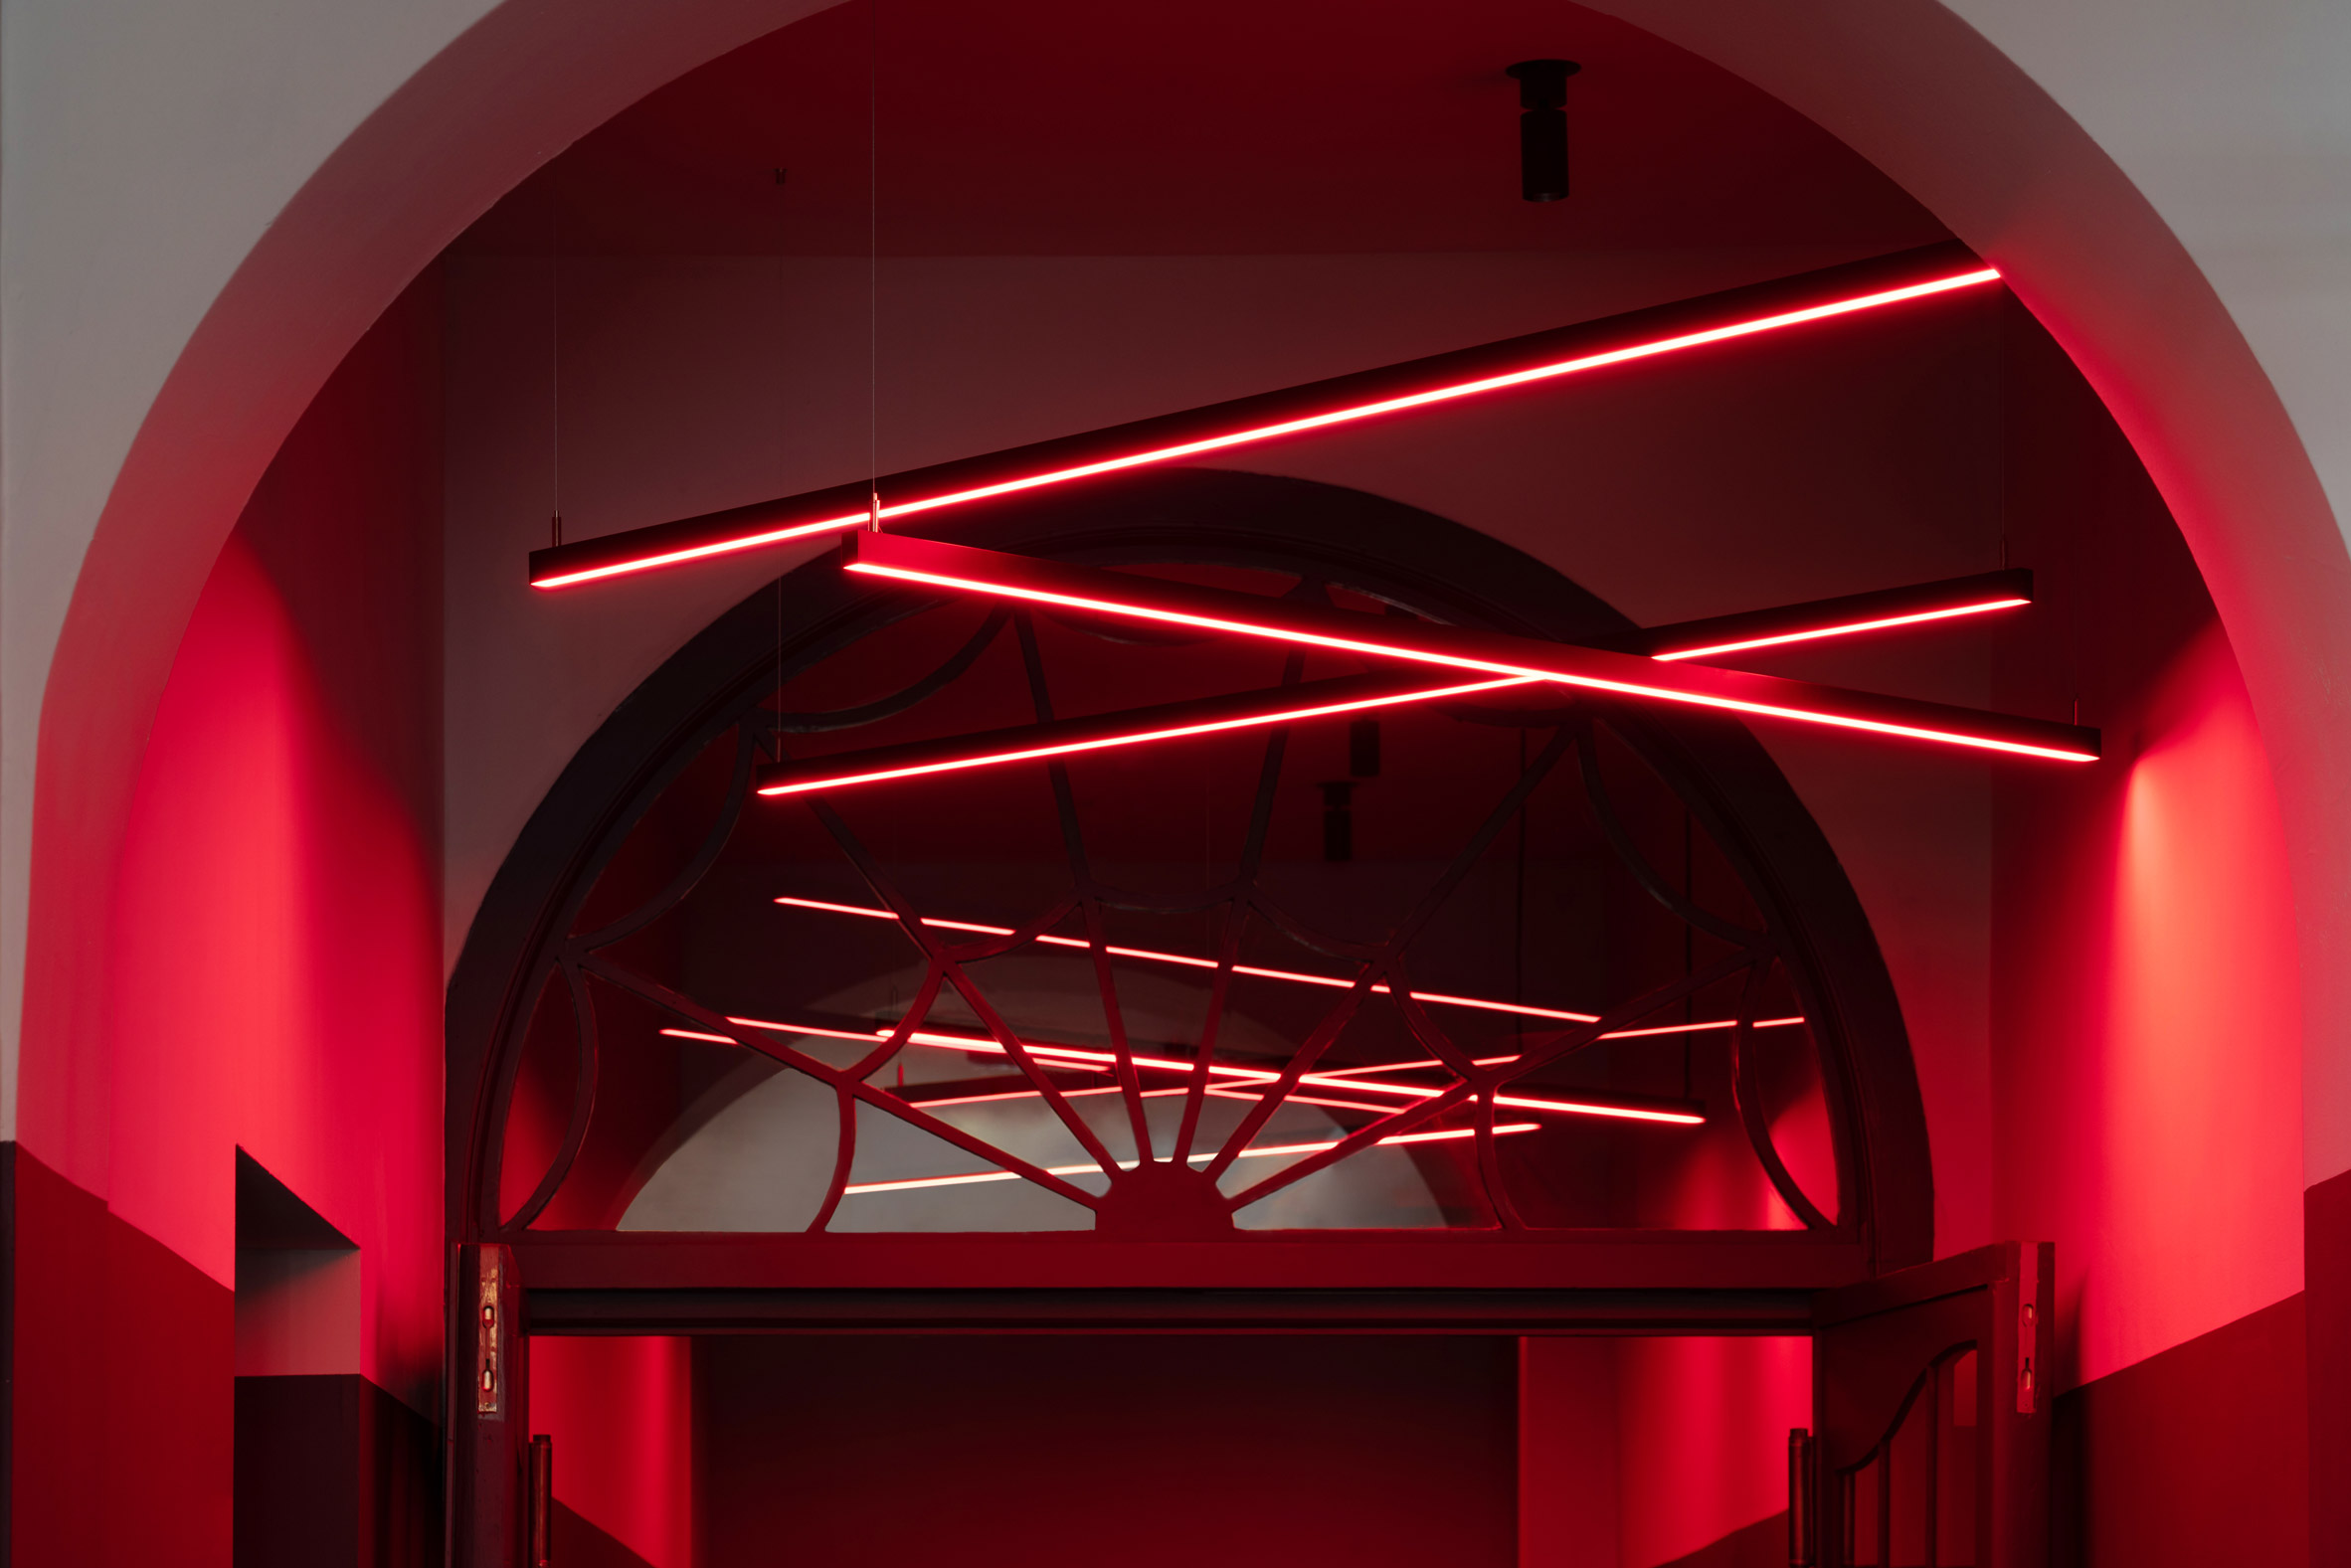 Neon lights decorate a red ceiling